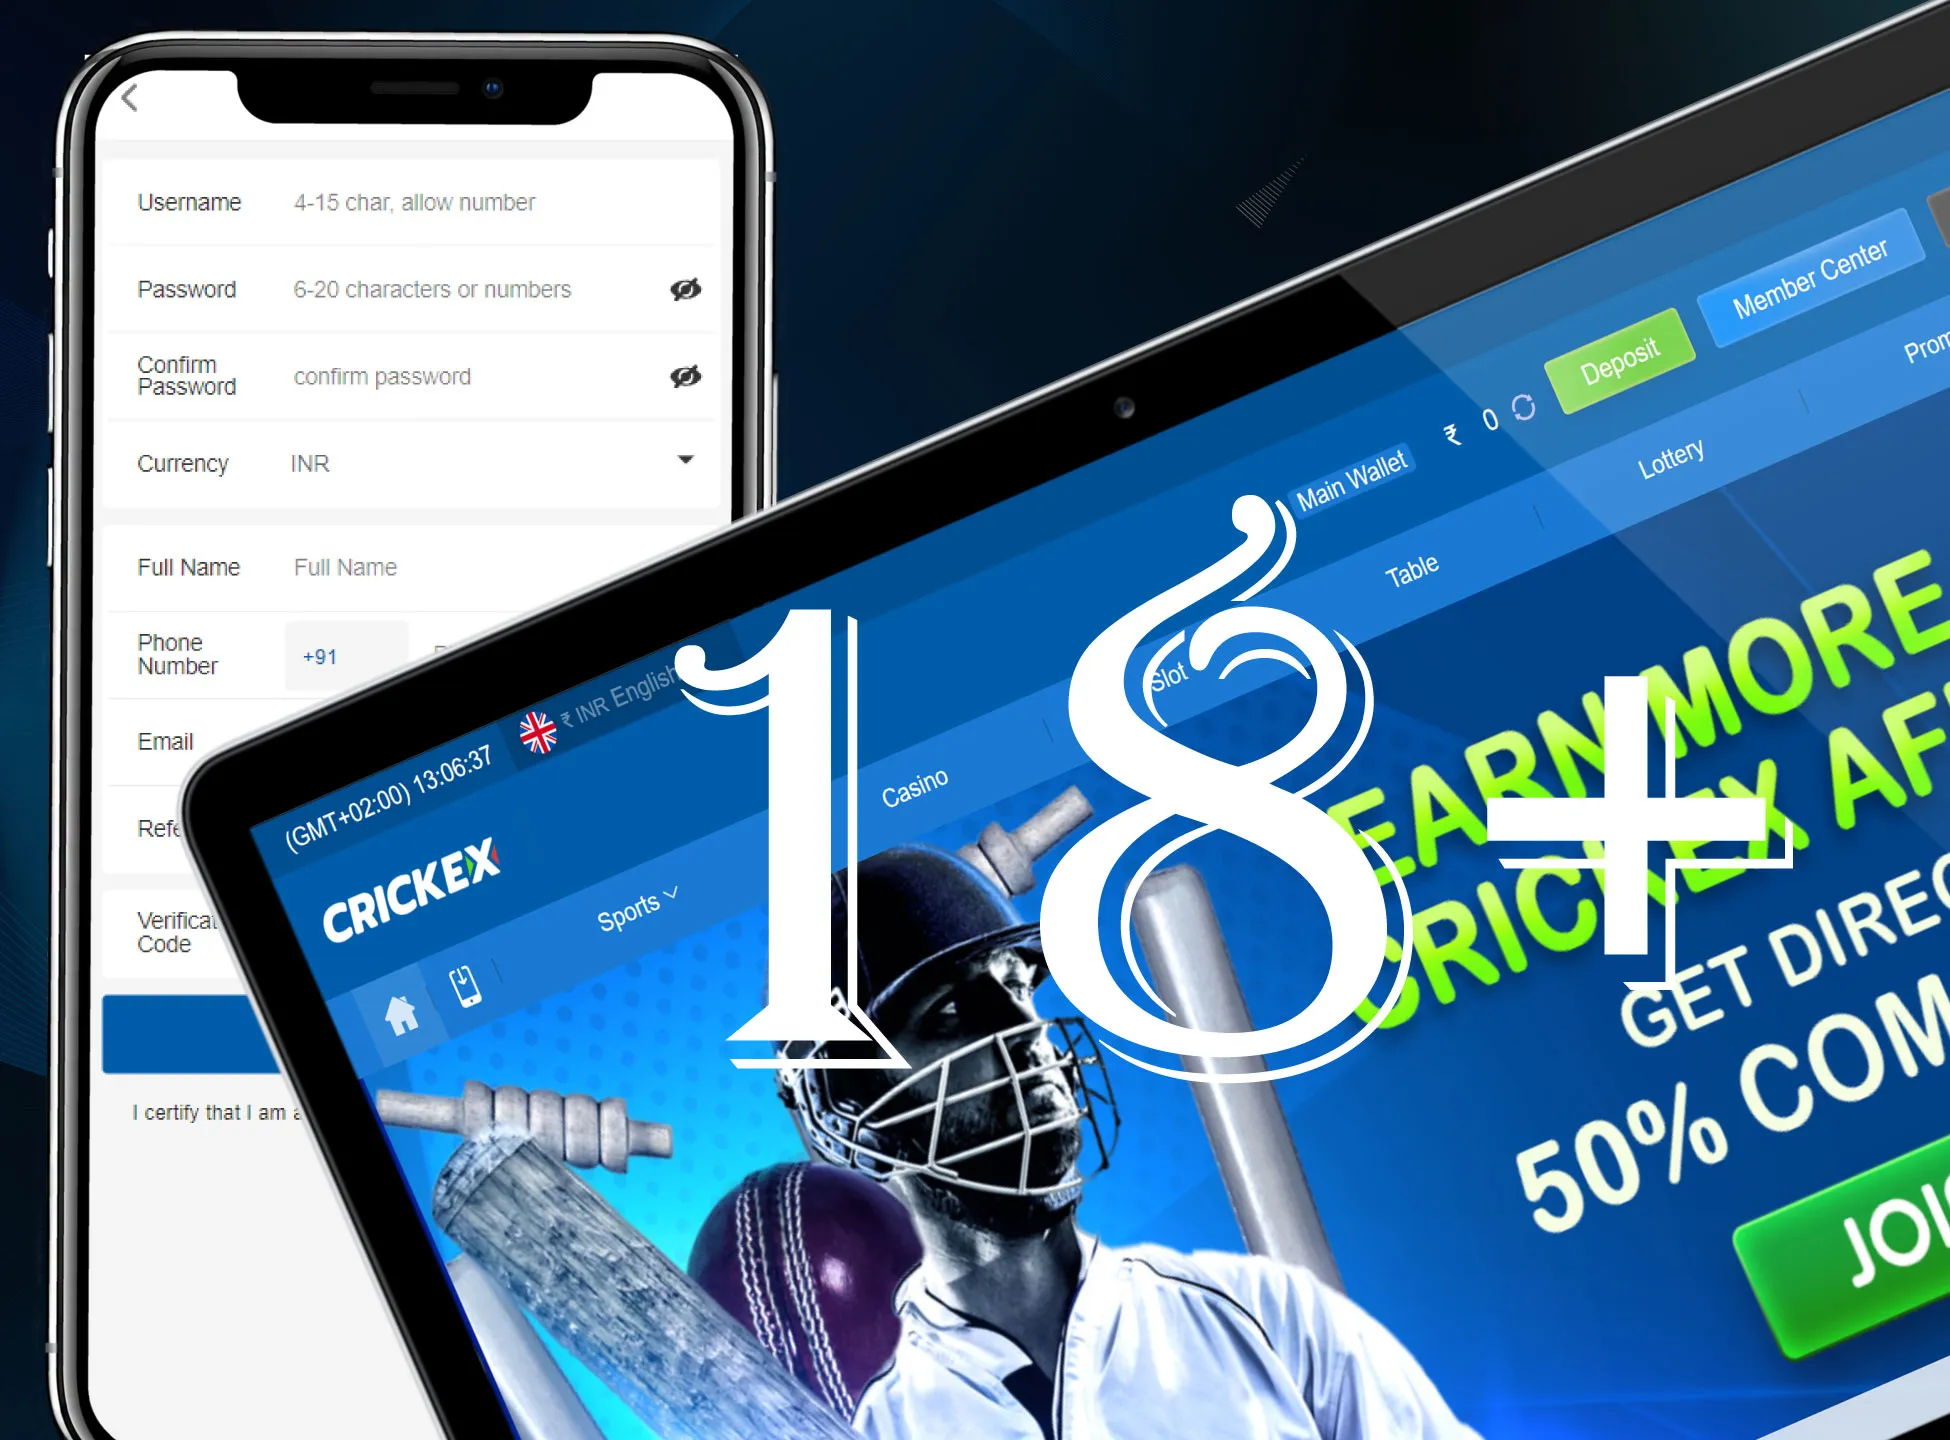 Follow these requirements to register on Crickex with no problems.